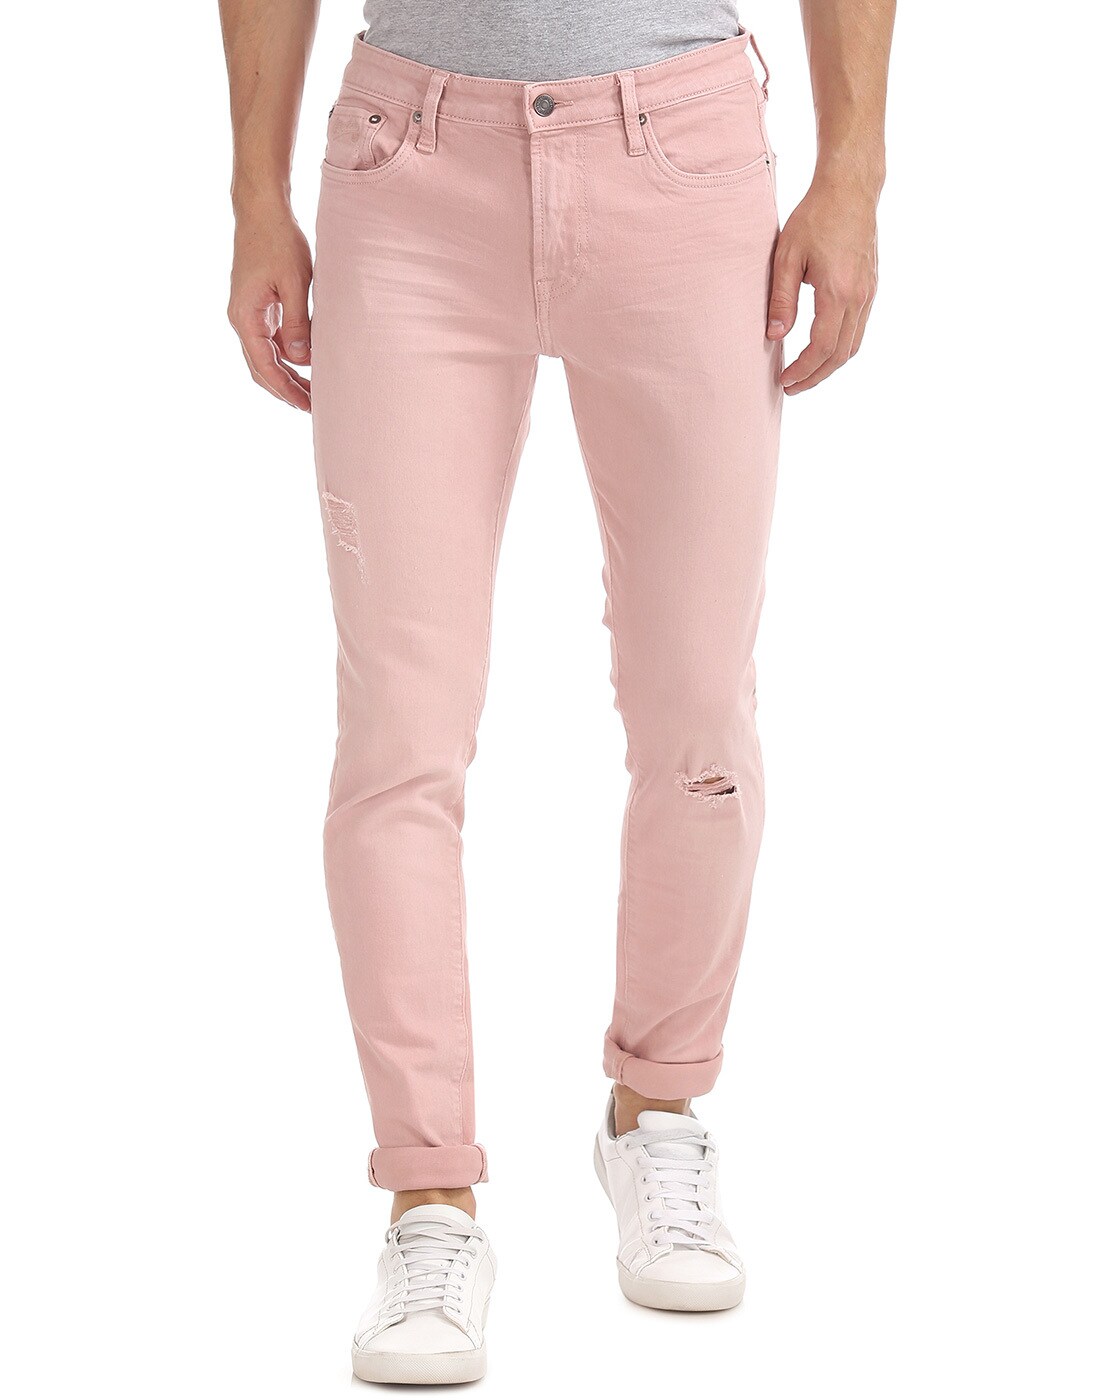 pink skinny jeans for guys